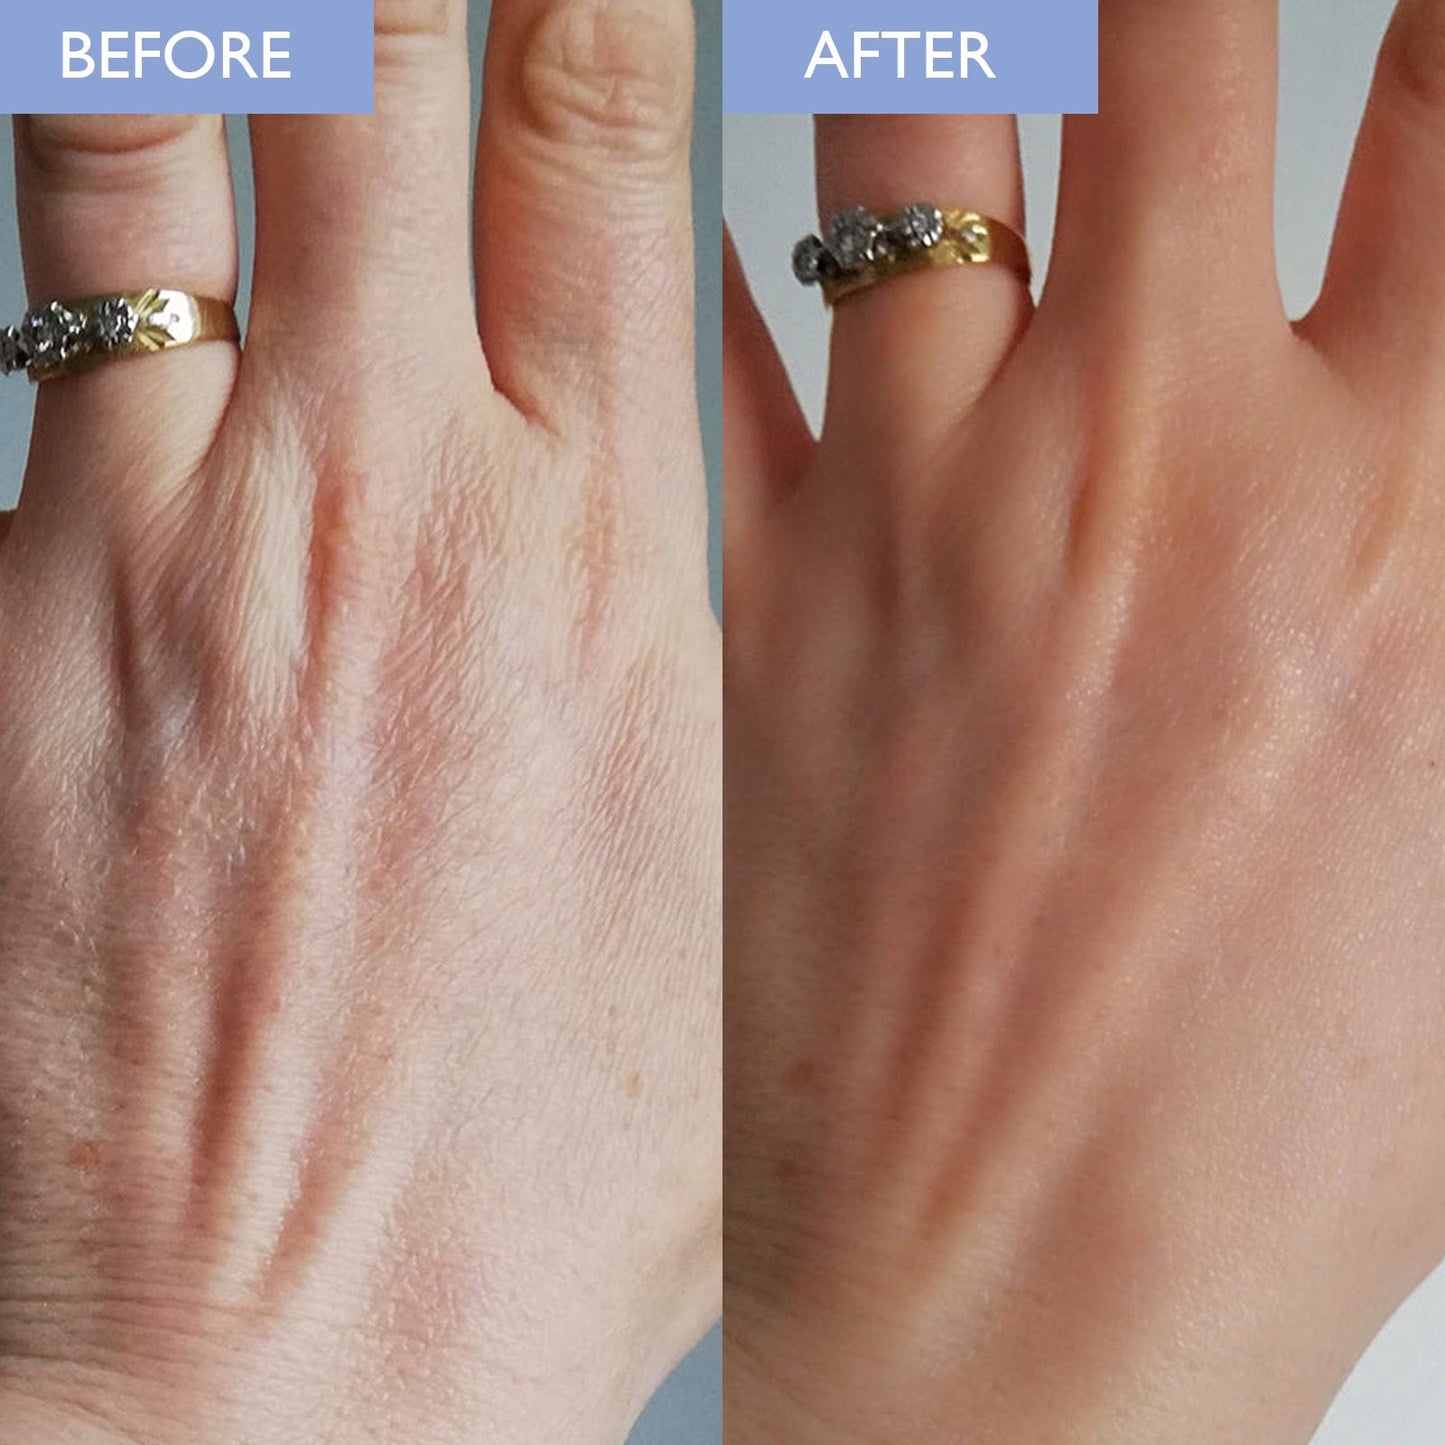 Image showing before and after using body lotion with vitamin e. Improvement in dry hands can be seen.